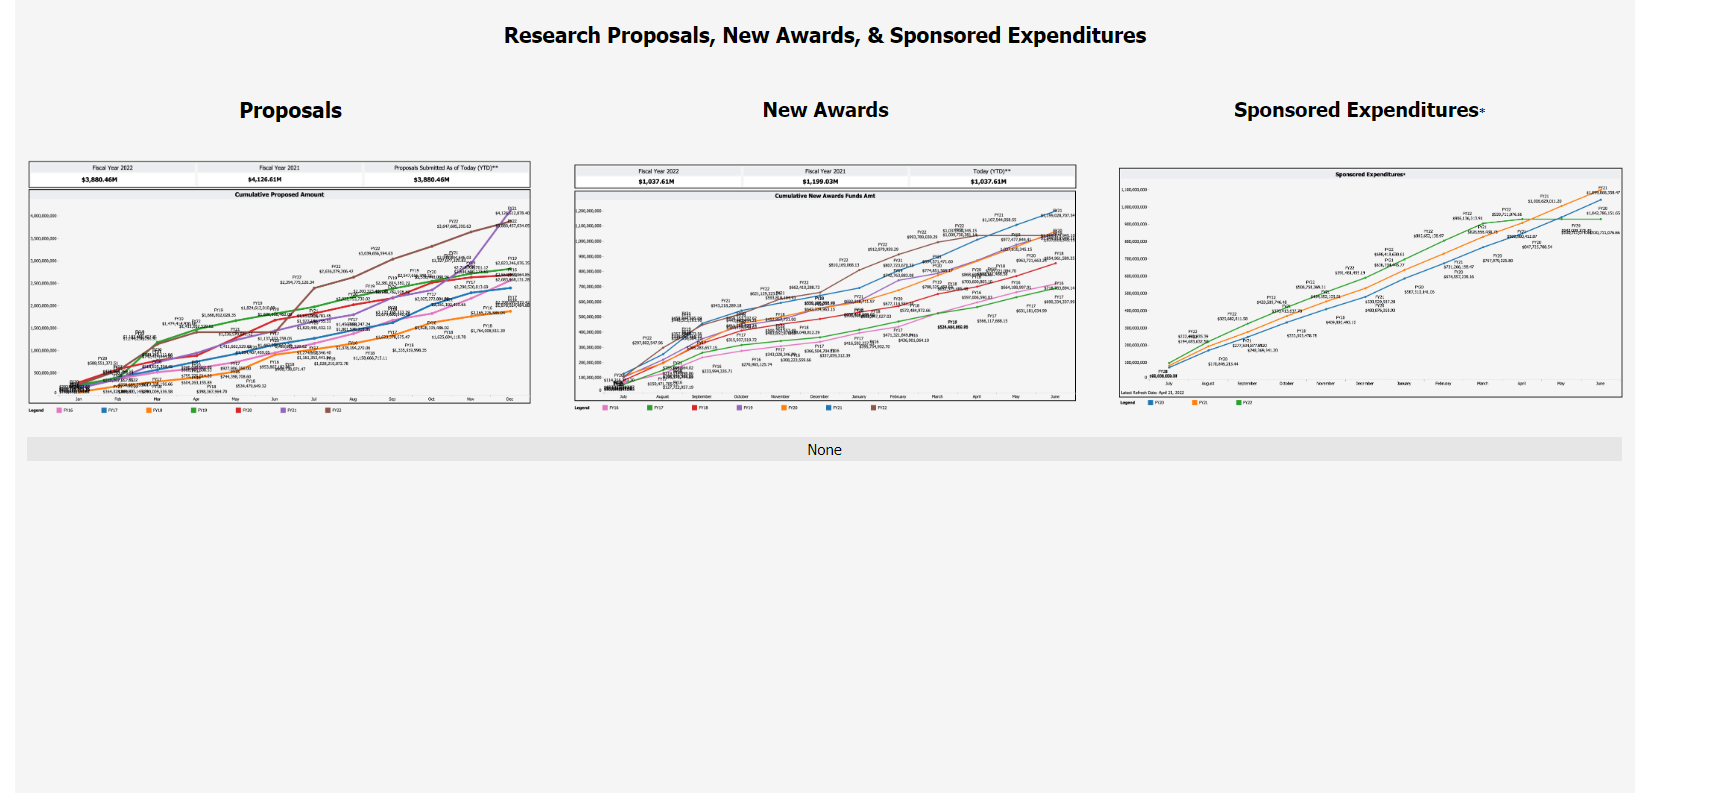 Research Proposals, New Awards, & Sponsored Expenditure